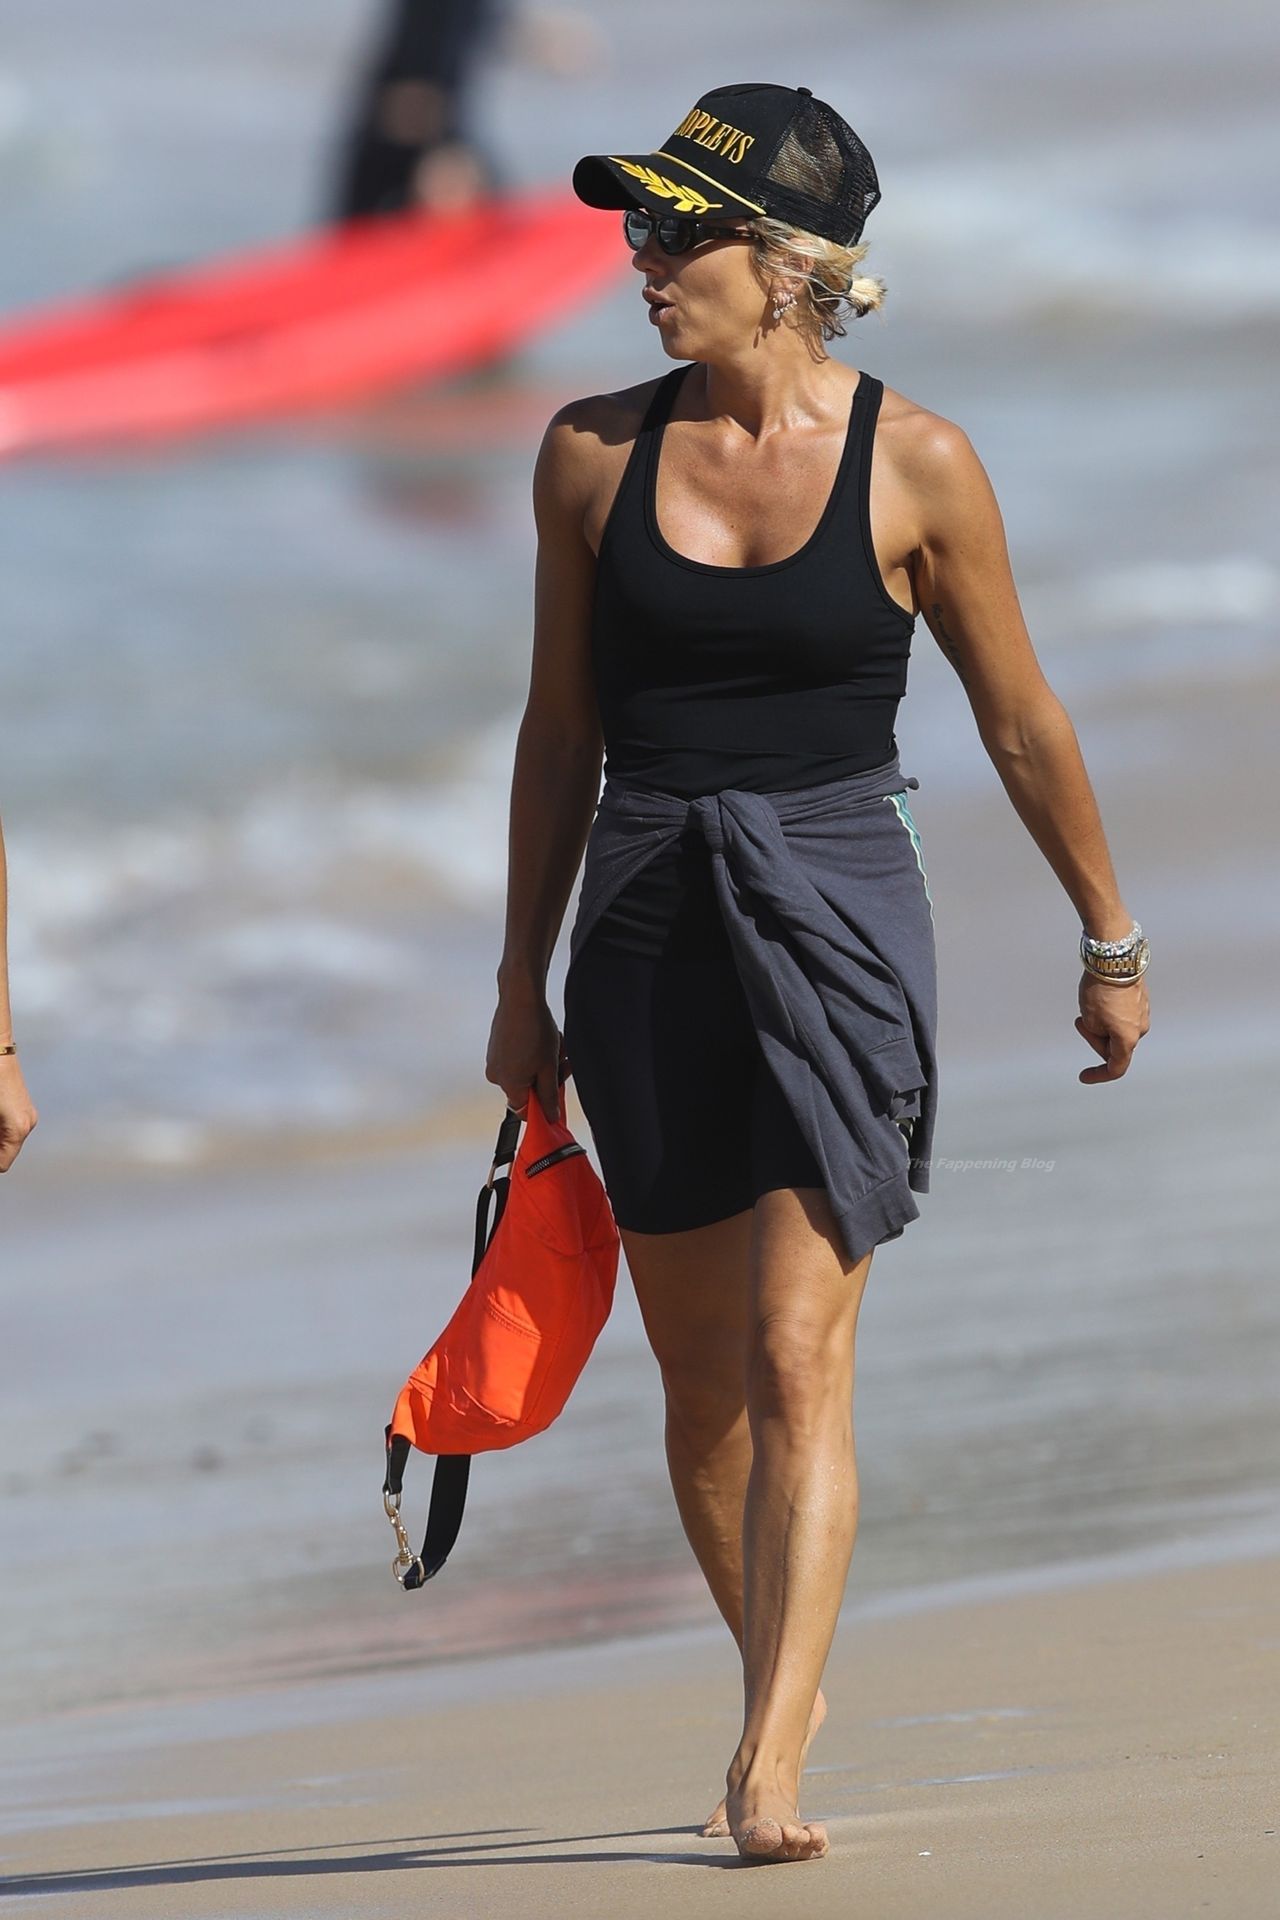 Pip E
dwards is Pictured Beaming While Taking a Walk on Bondi Beach (42 Photos)